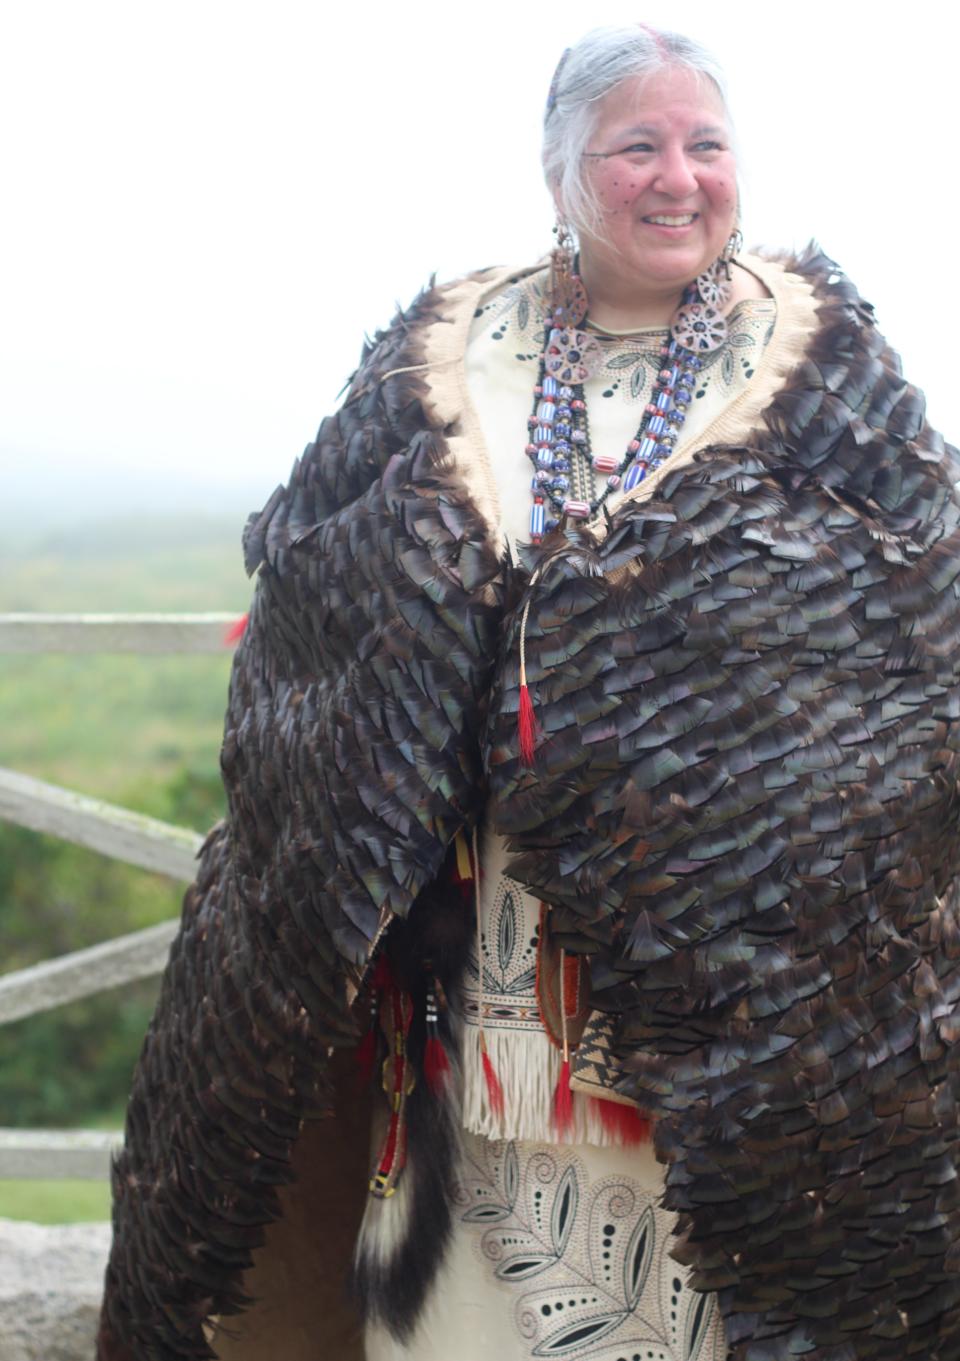 It took about a year for Julia Marden, a member of the Wampanoag Tribe Gay Head (Aquinnah) to twine a turkey feather mantle, which she revealed Sunday during the Aquinnah Wampanoag Powwow. The cape-like garment is the first of its kind on the East Coast in 400 years.